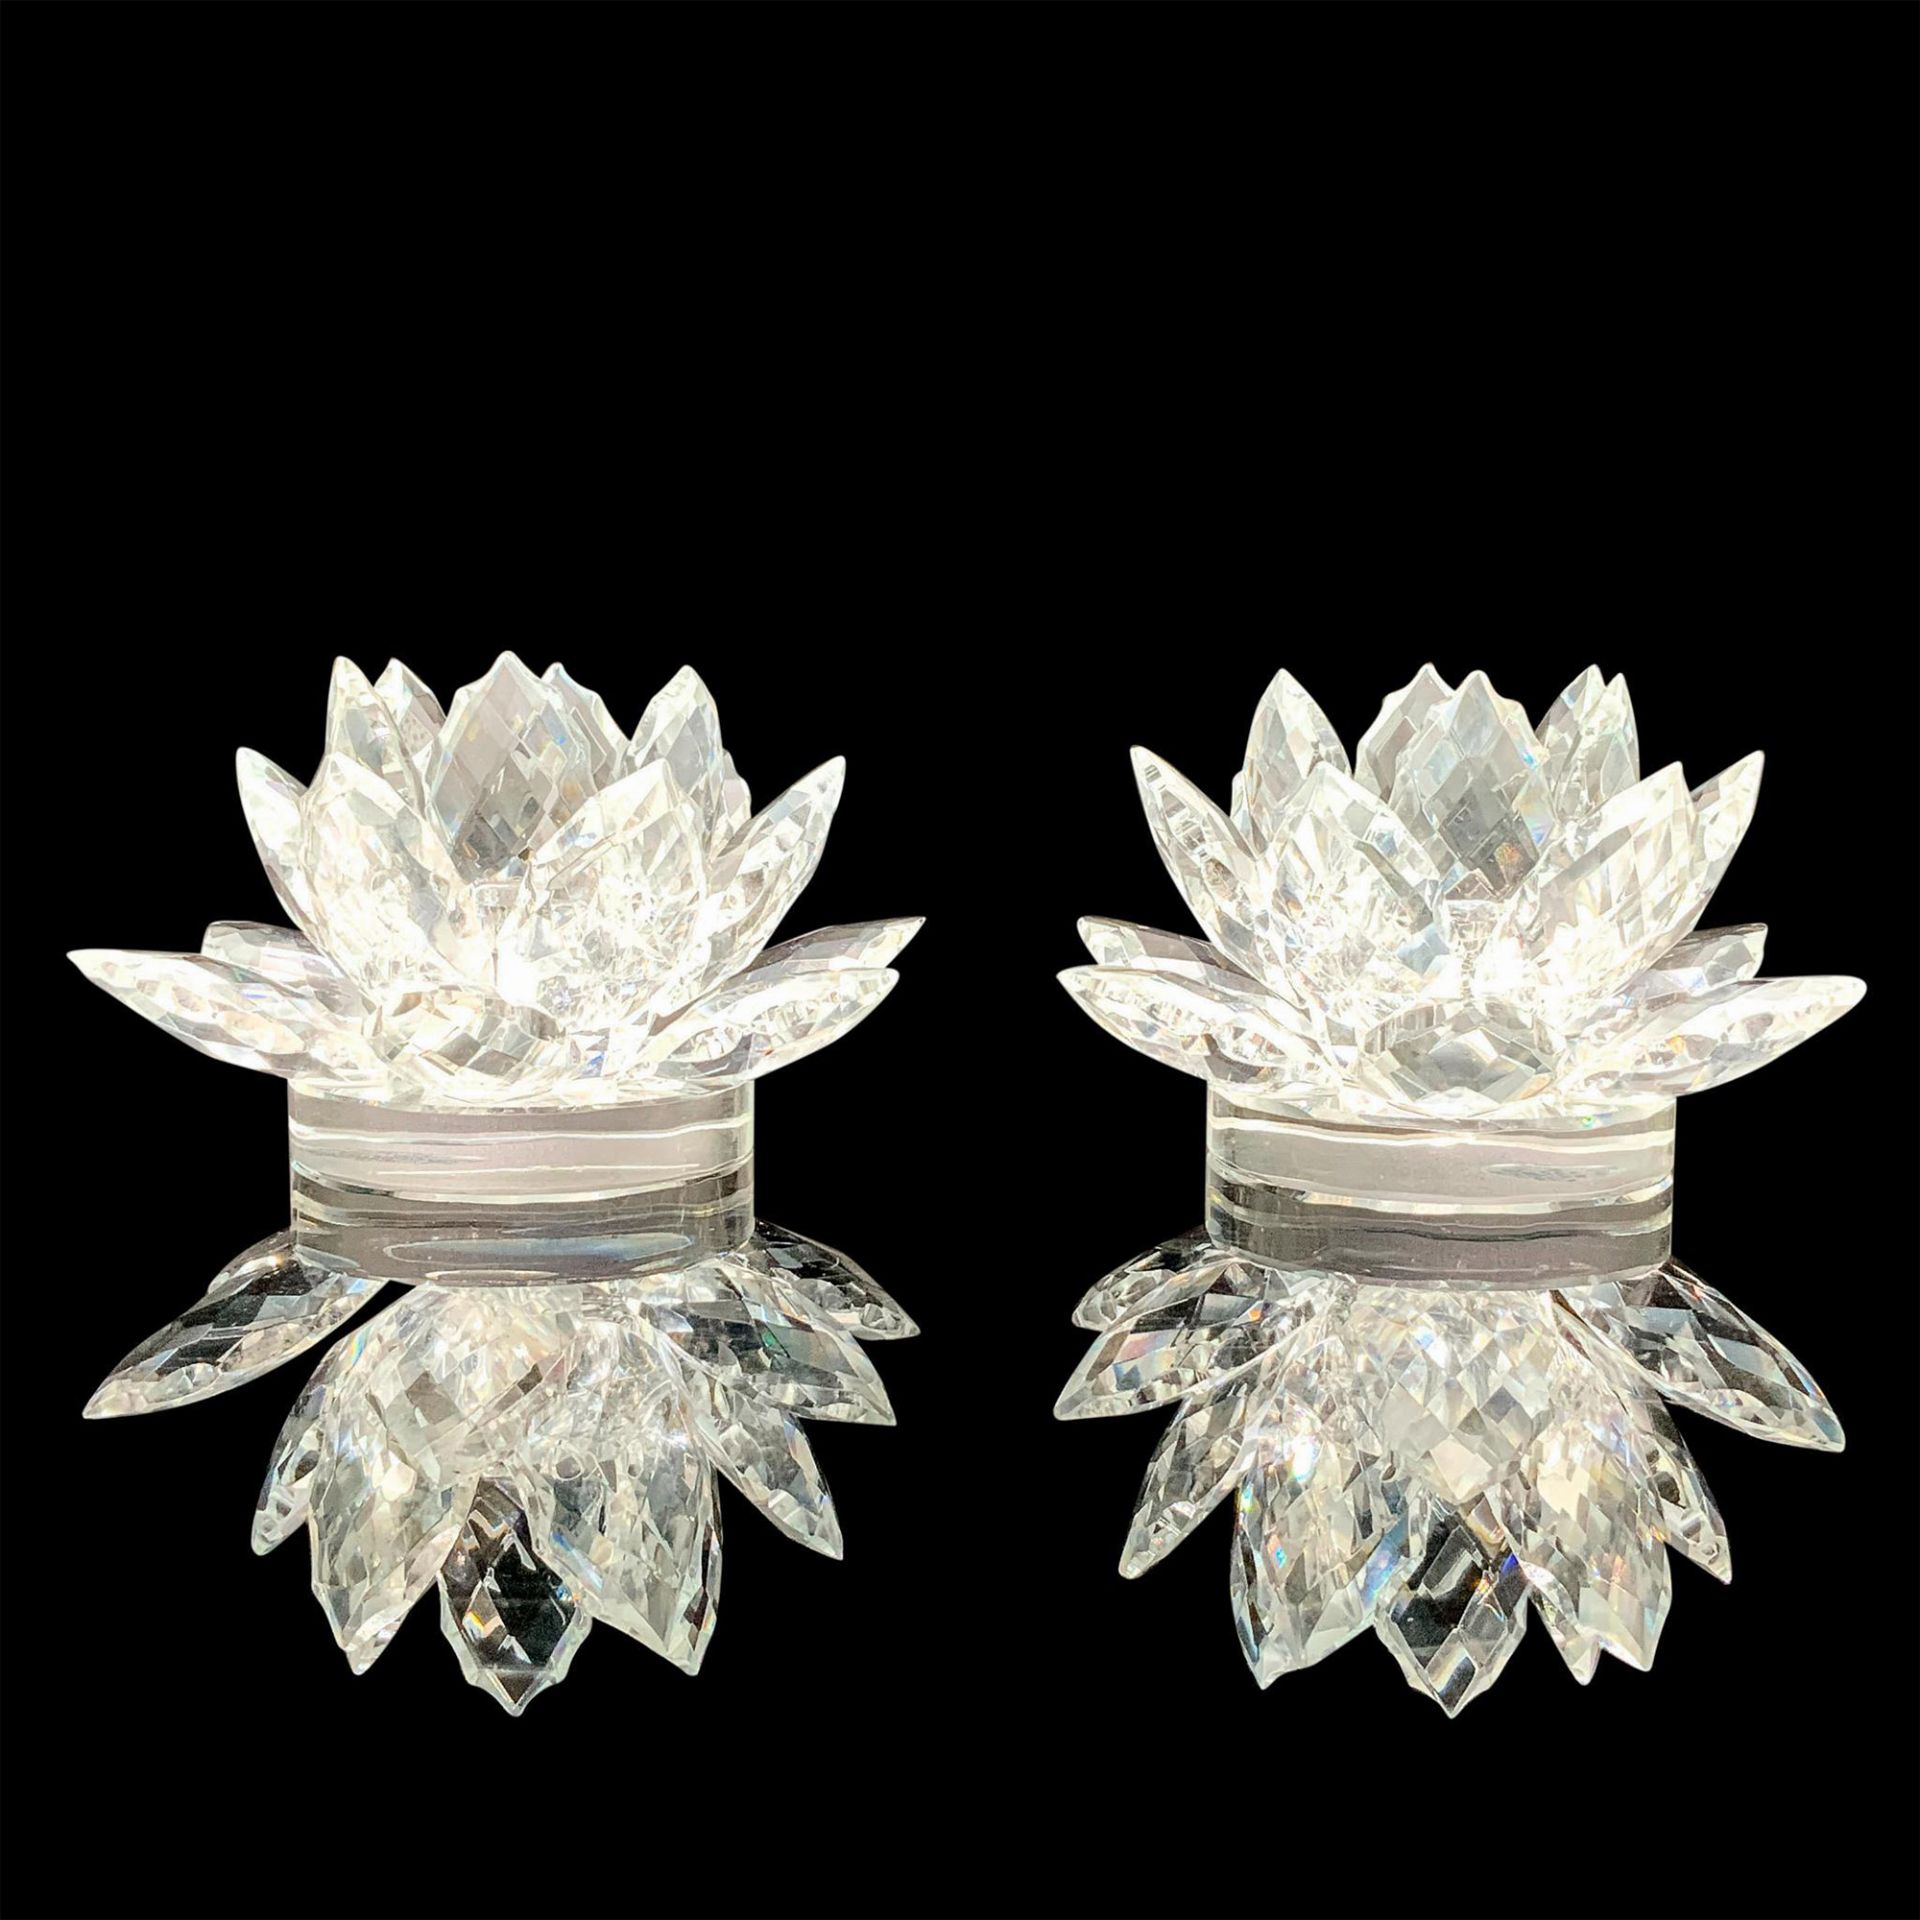 2pc Shannon Crystal Flower Candleholders - Image 2 of 3